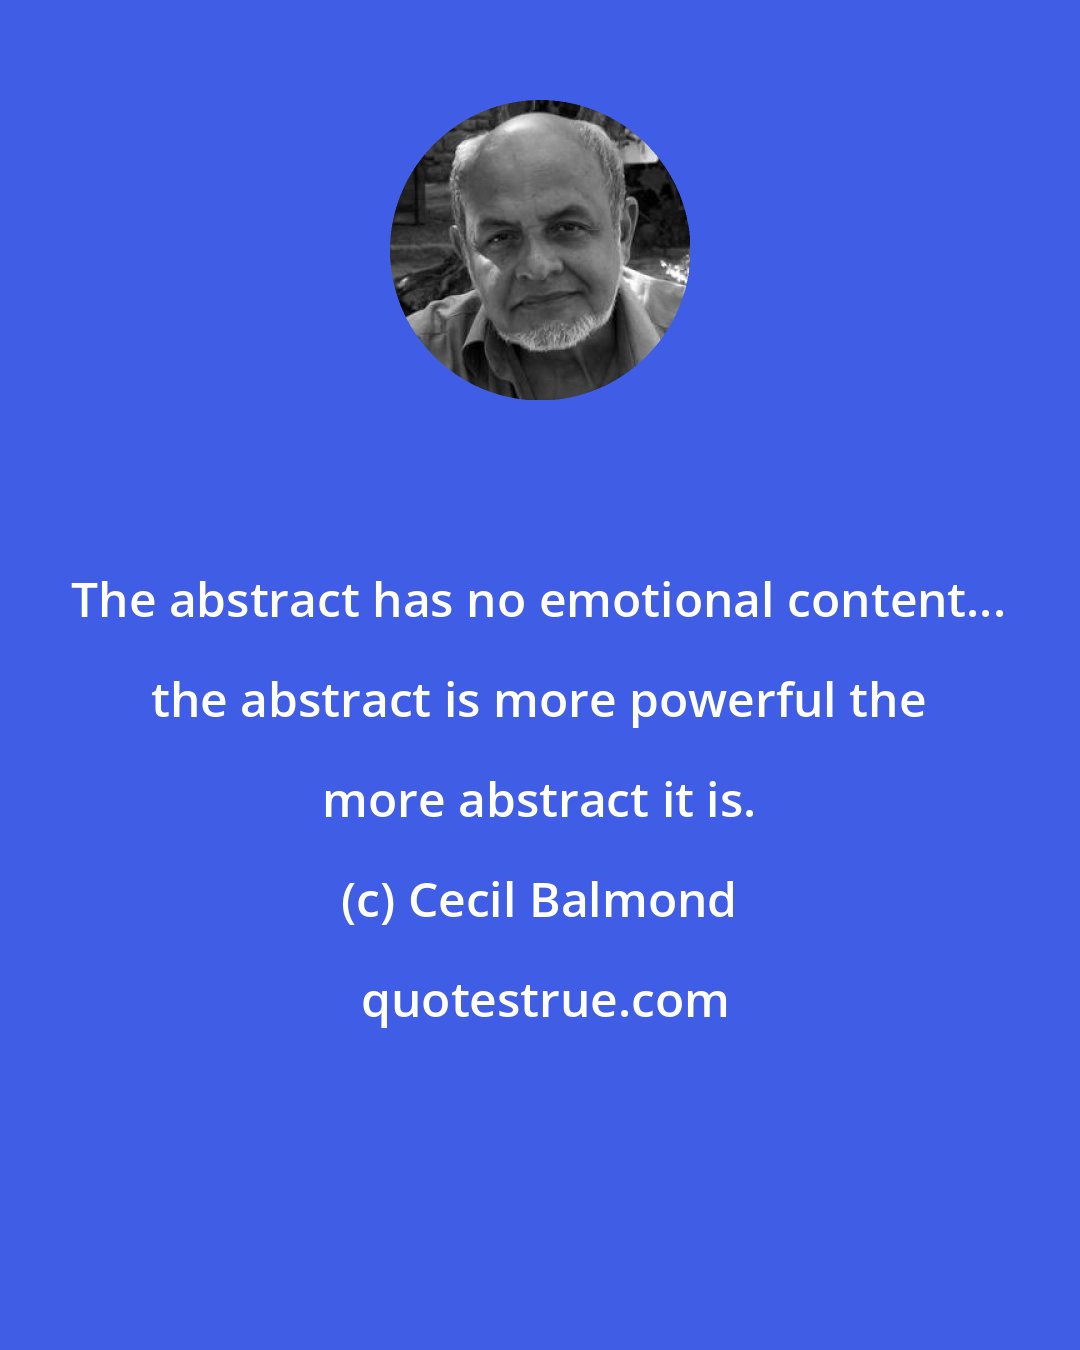 Cecil Balmond: The abstract has no emotional content... the abstract is more powerful the more abstract it is.